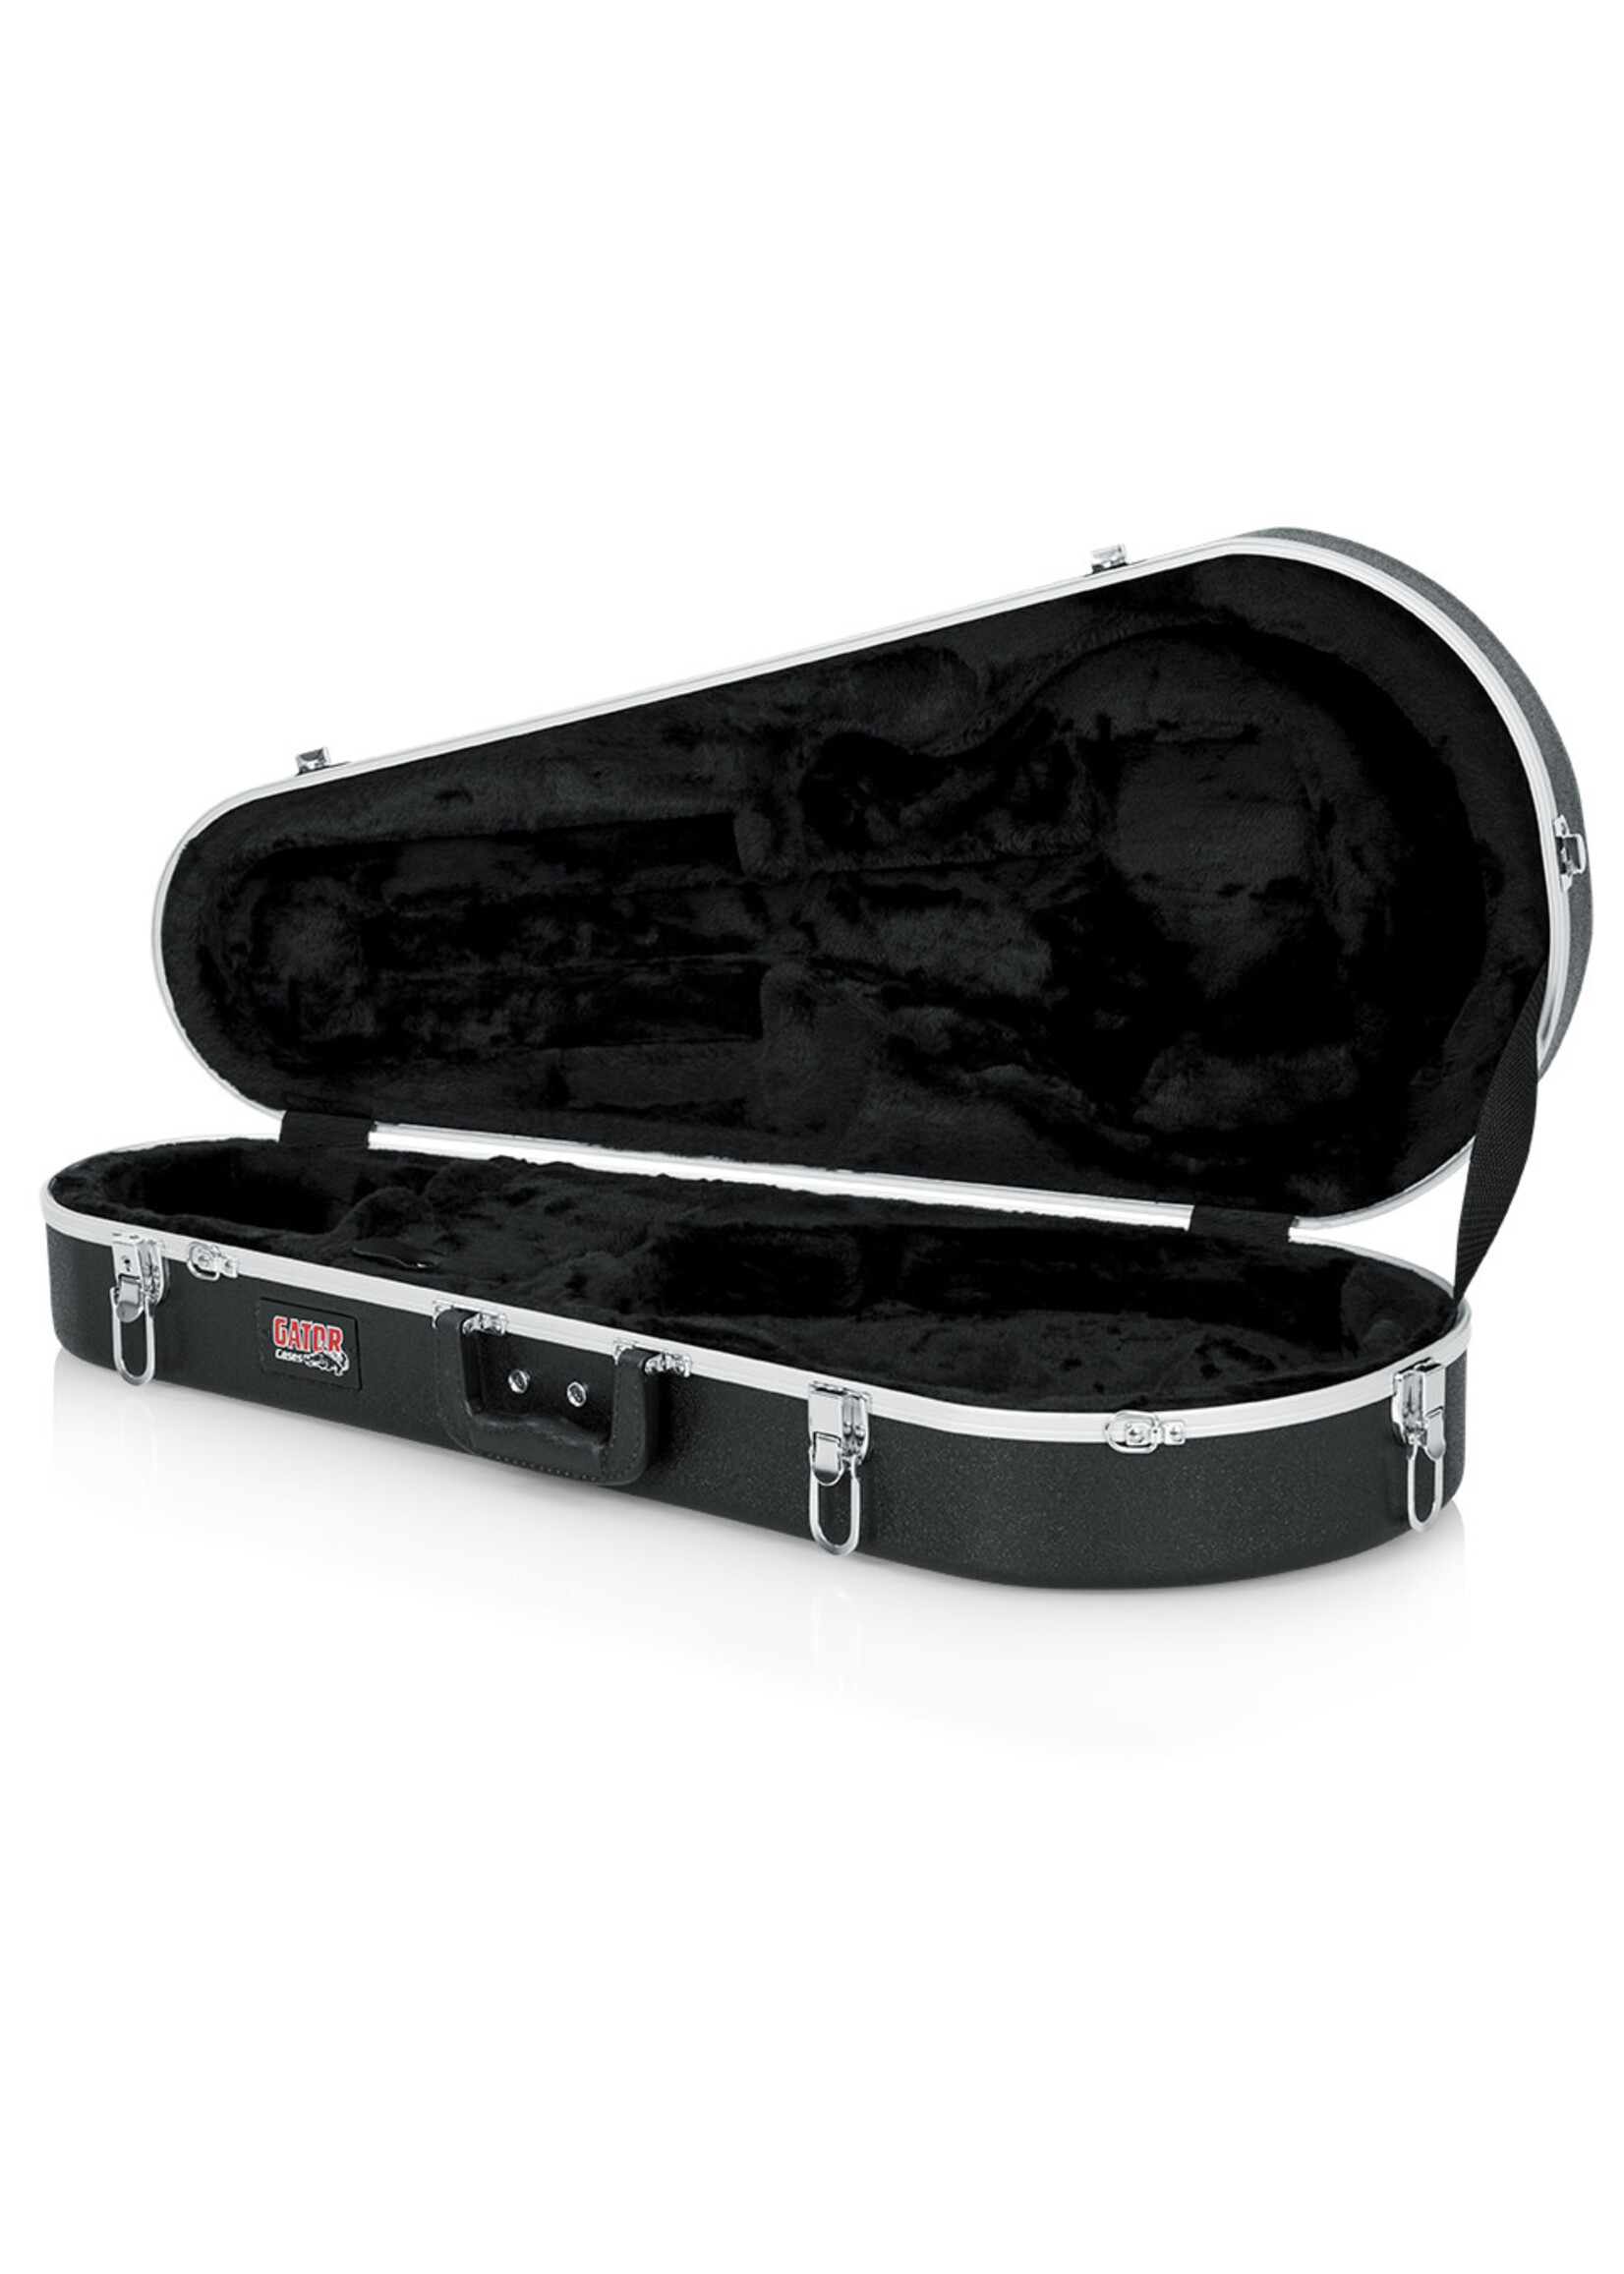 Gator Gator GC-MANDOLIN Deluxe Molded Case for Both A and F Style Mandolins